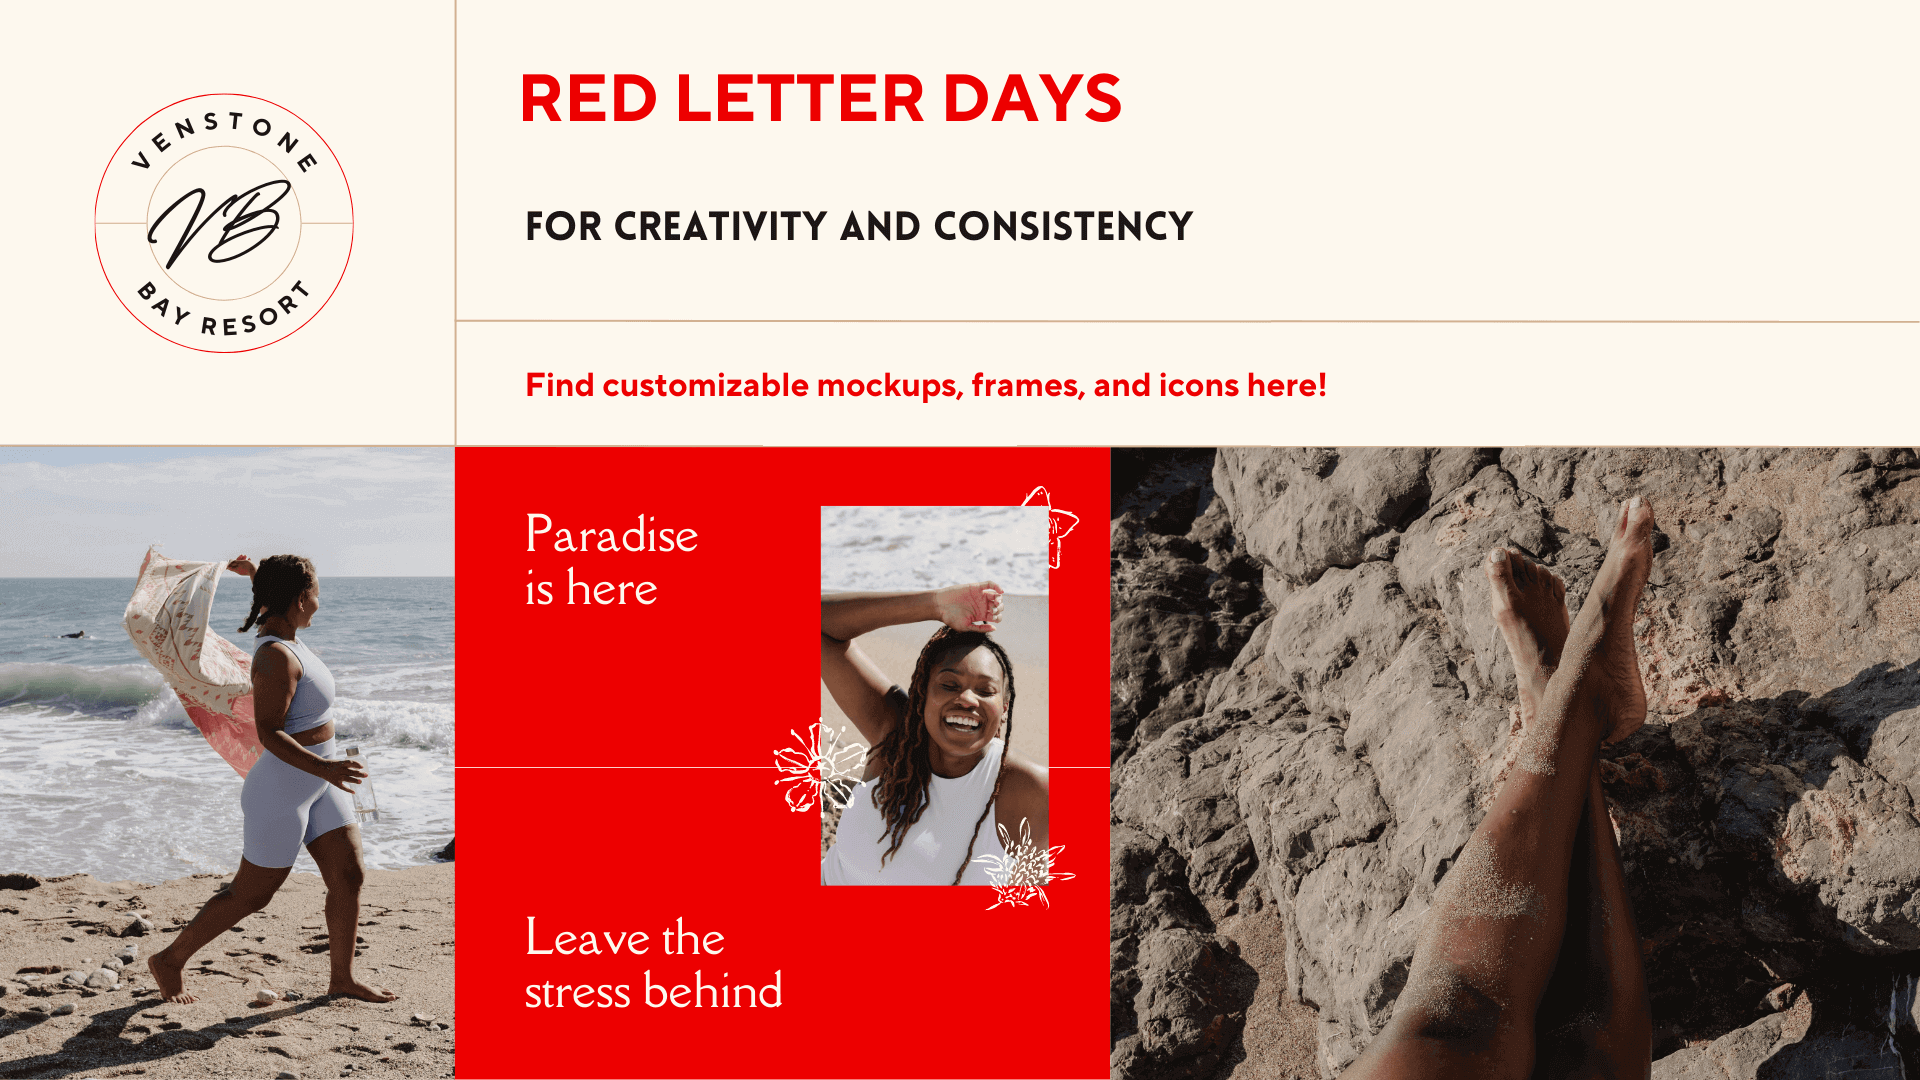 Rediscover the Joy of Life With Red Letter Days